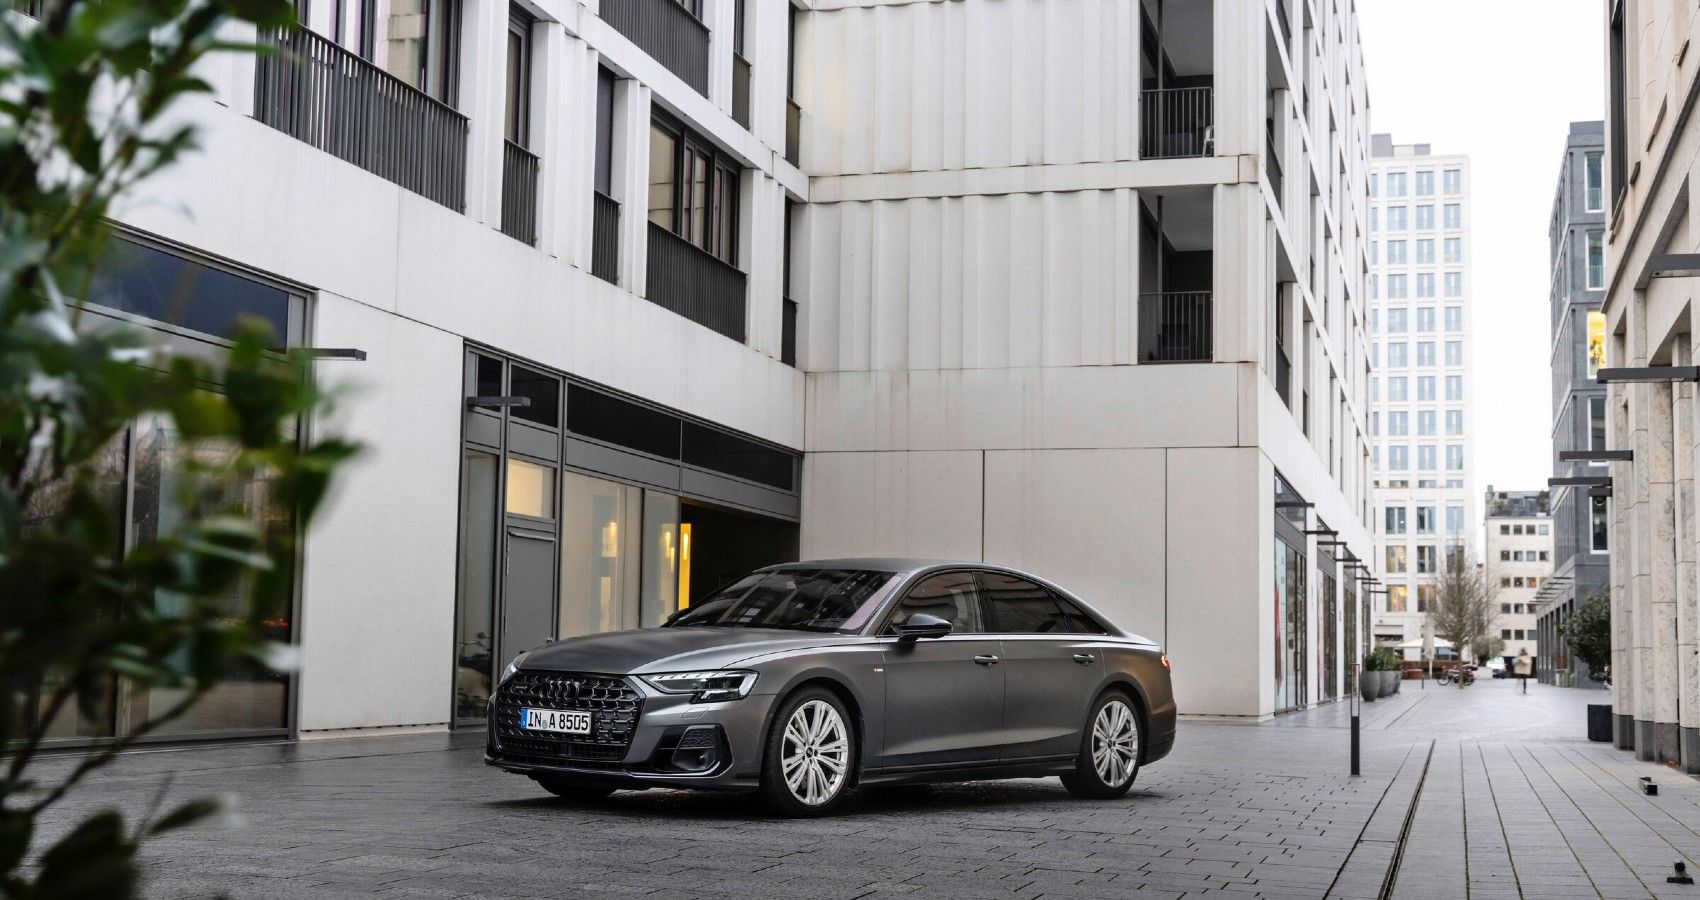 Gray Audi A8 on the driveway